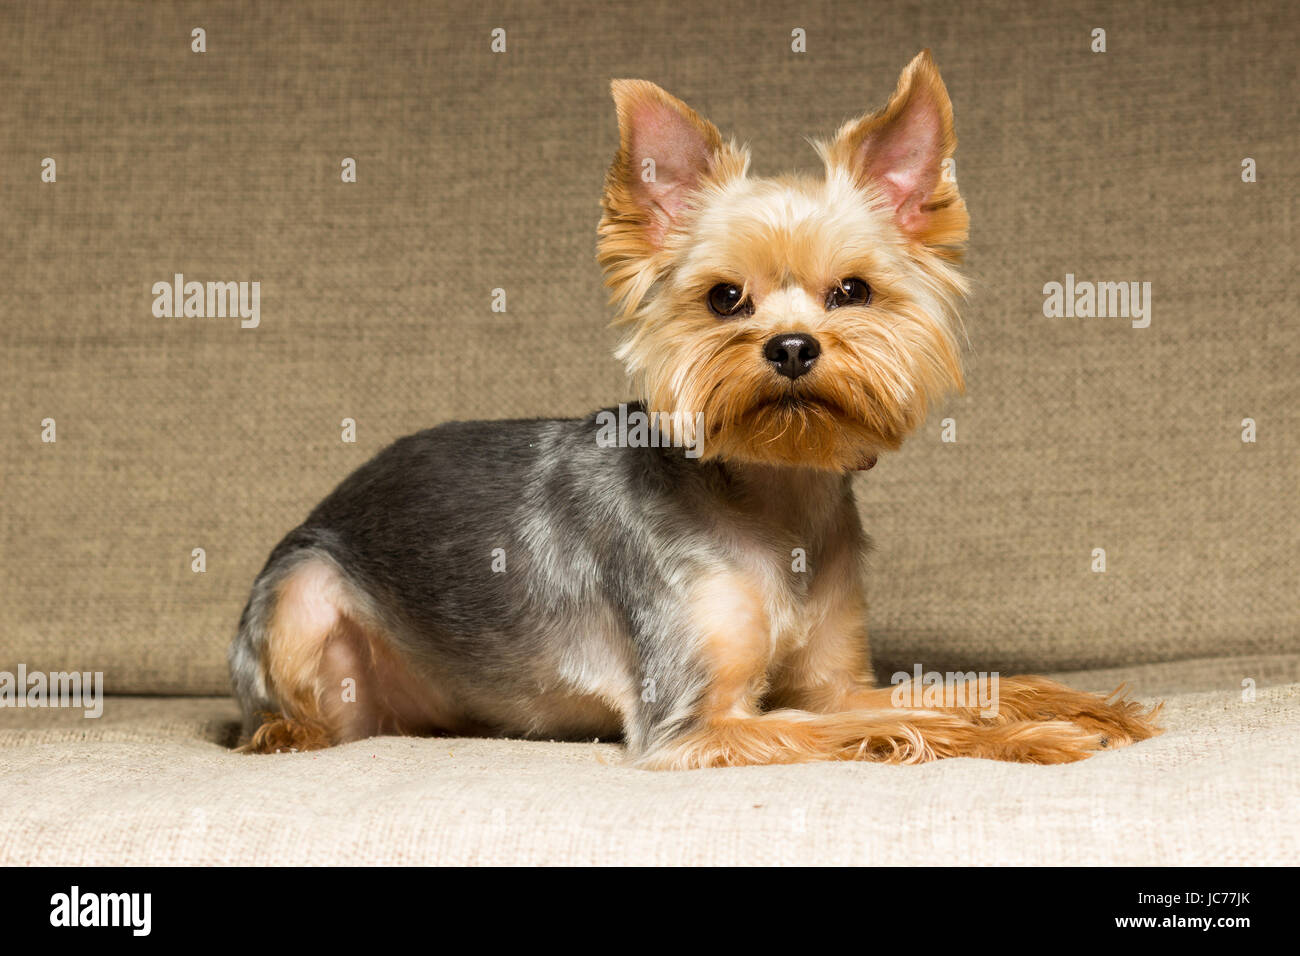 Yorkshire Terrier Haircut Stock Photos Yorkshire Terrier